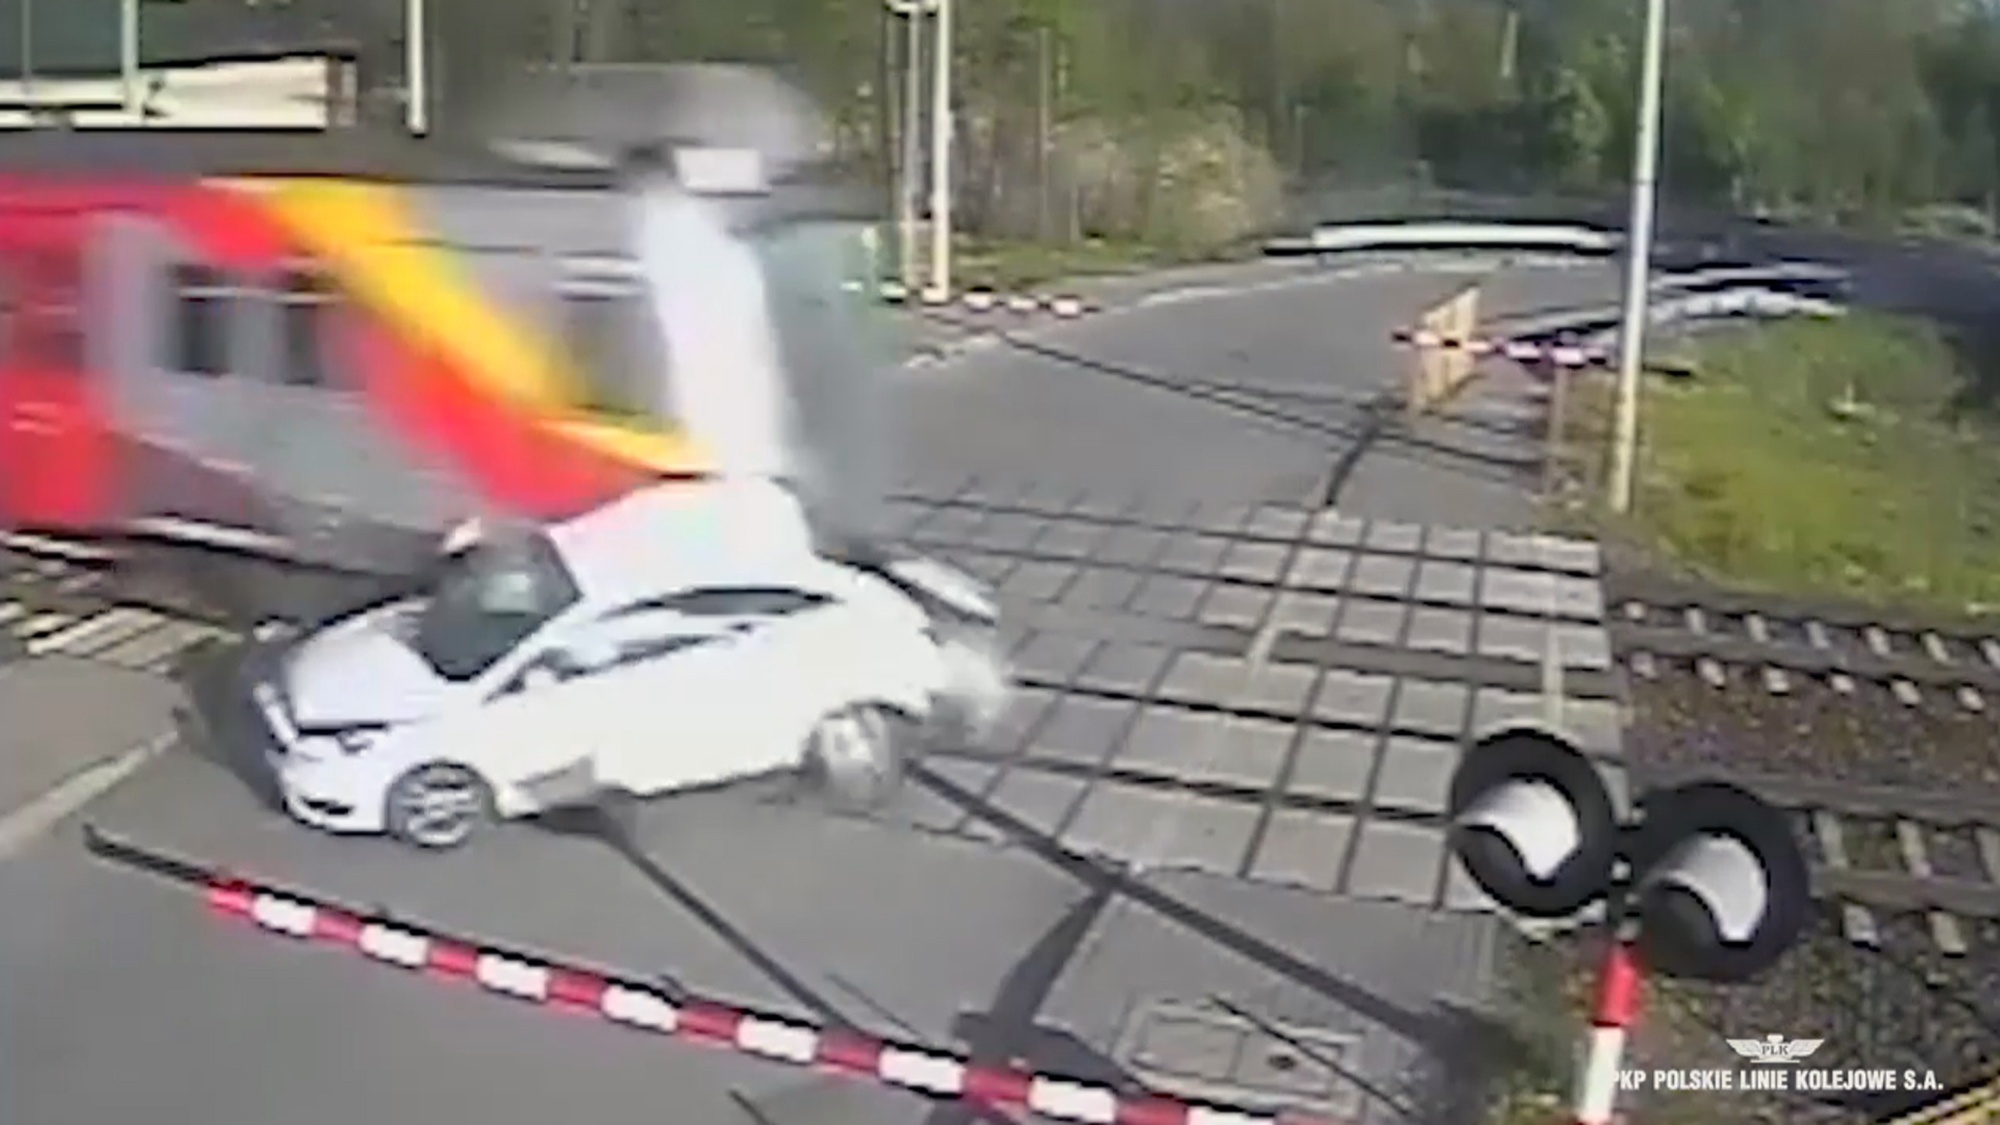 Read more about the article Train Smashes Into Car On Railway Crossing, Sending It Spinning